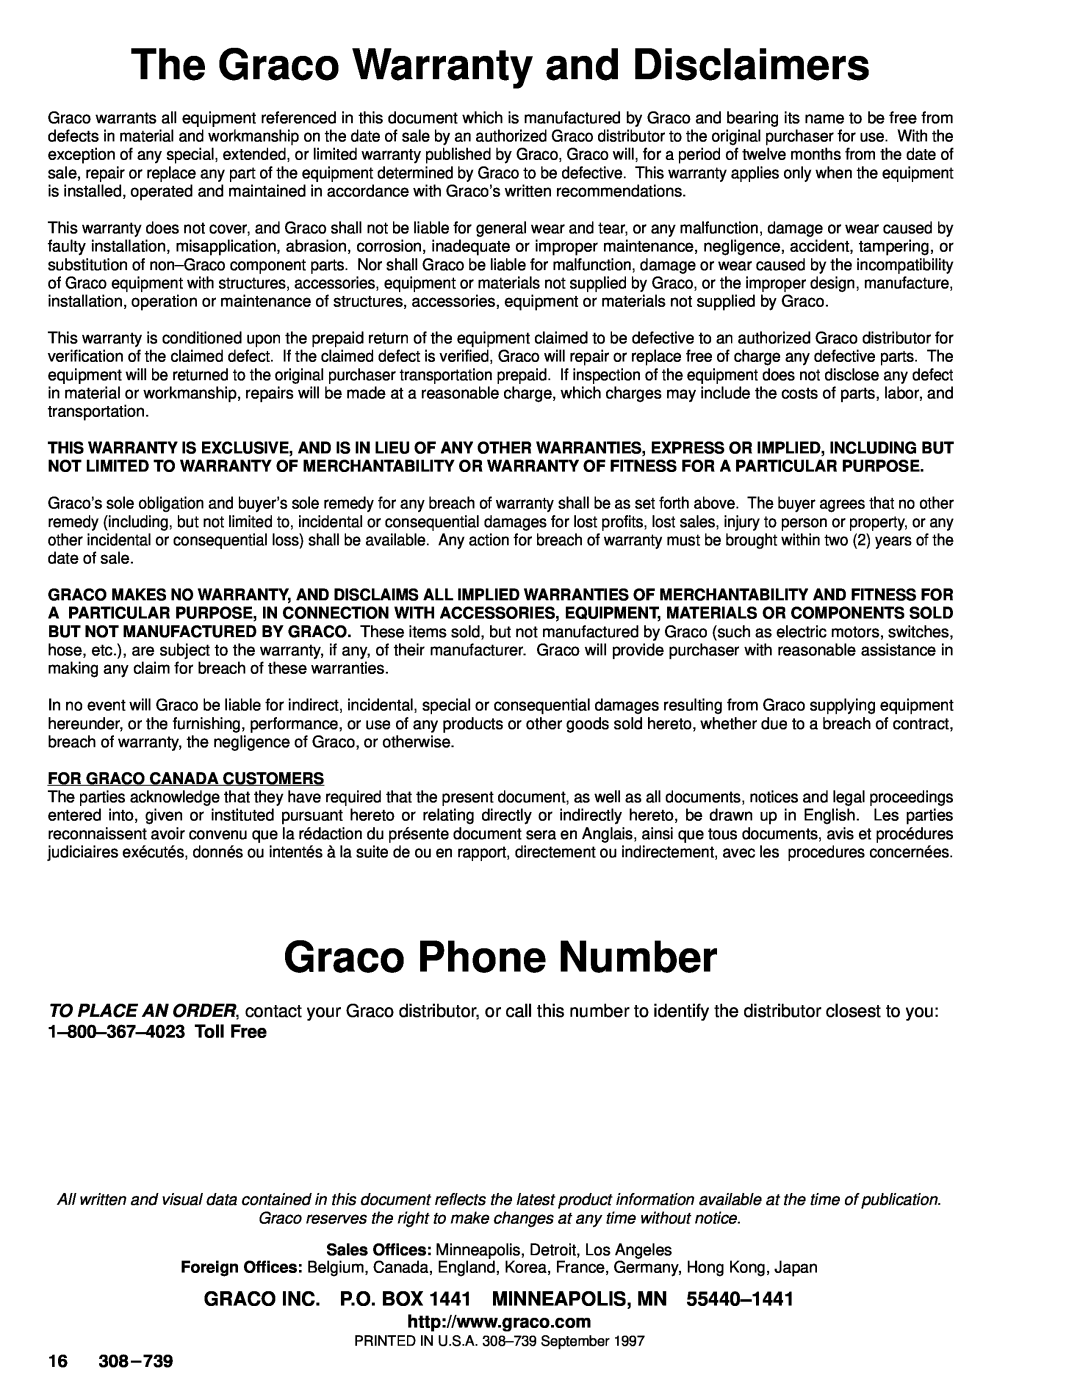 Graco Series A, 239-327 manual The Graco Warranty and Disclaimers, Graco Phone Number, 1±800±367±4023 Toll Free 